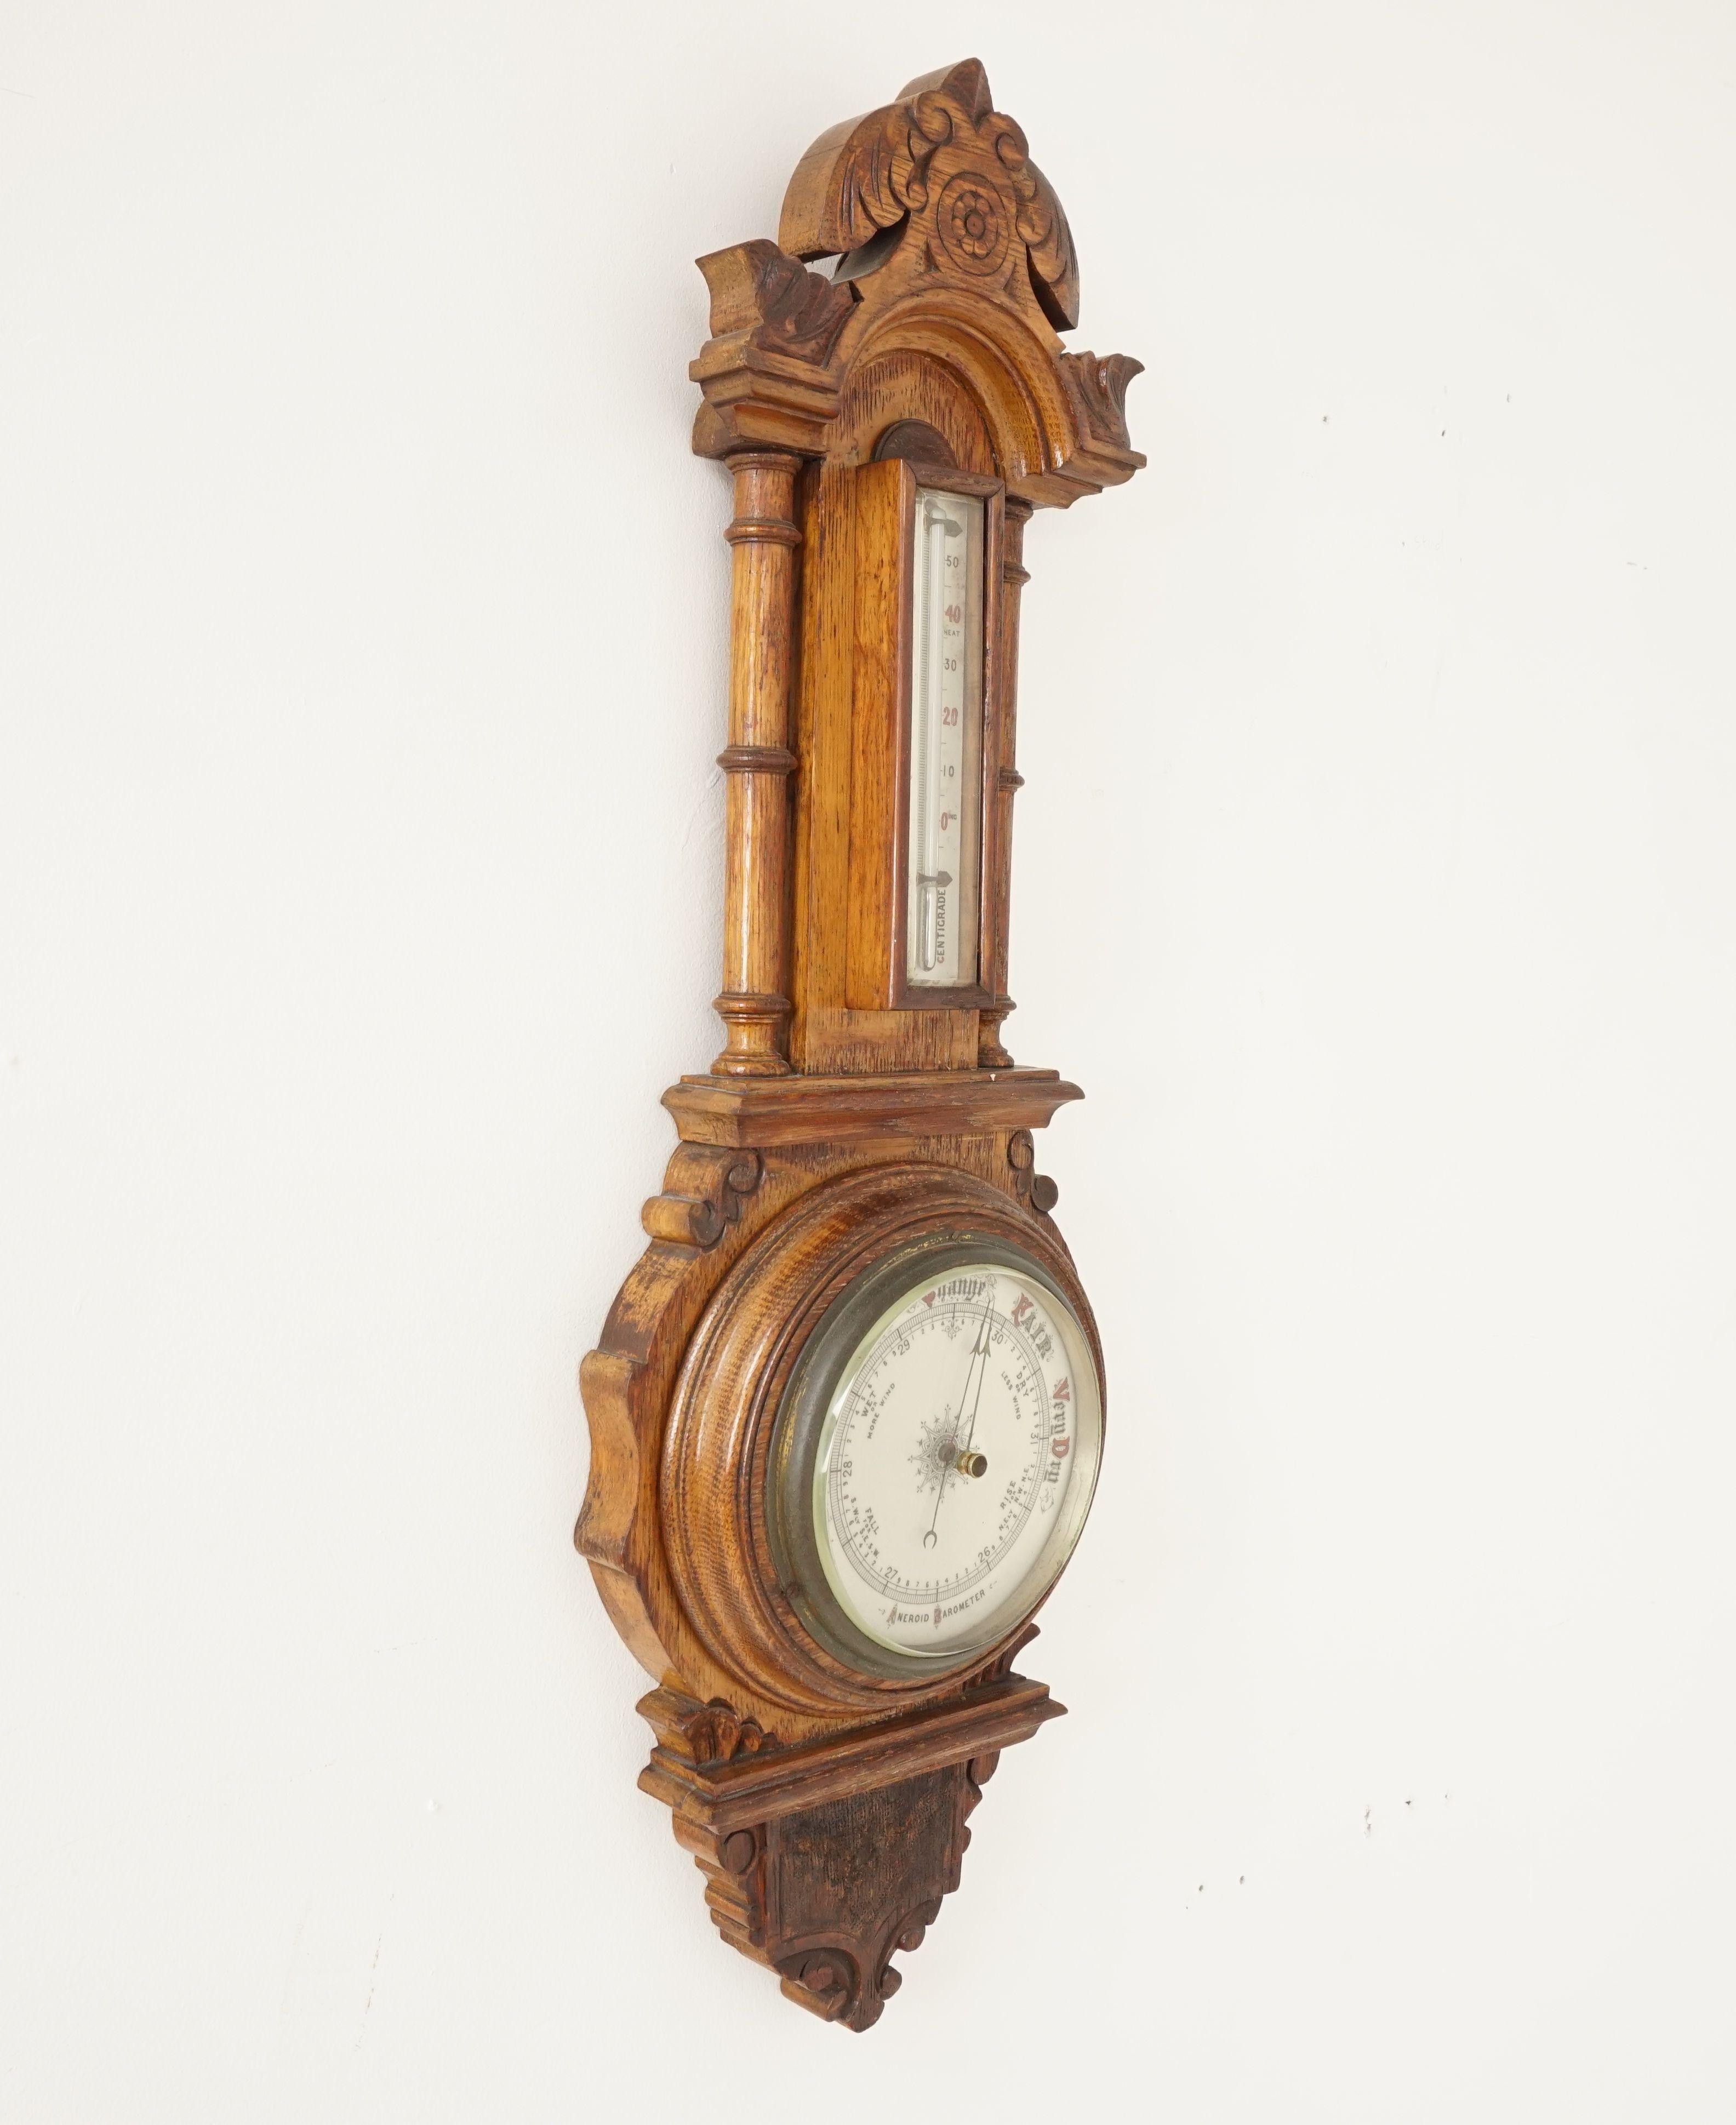 Antique carved oak barometer, Banjo Barometer, Aneroid, Scotland 1890, B2459

Scotland 1890
Solid oak
Original finish
Decorative
Carved and fretted case
Domed shaped top
Oak thermometer box below
Decorative porcelain dial to the aneroid